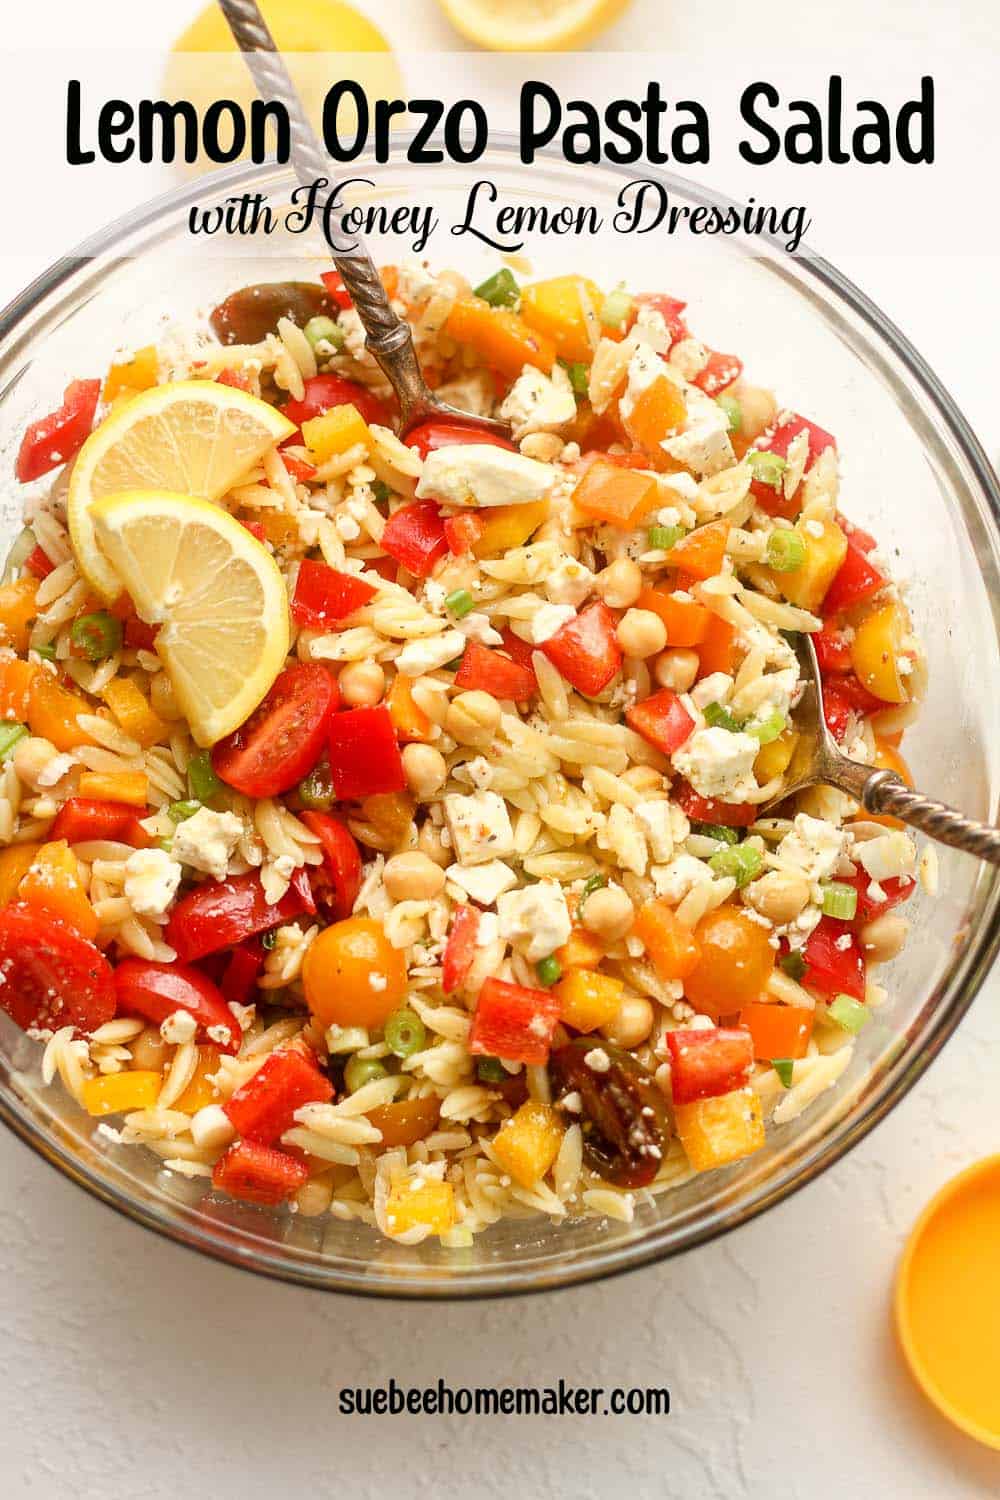 A large glass bowl of lemon orzo pasta salad with serving spoons.